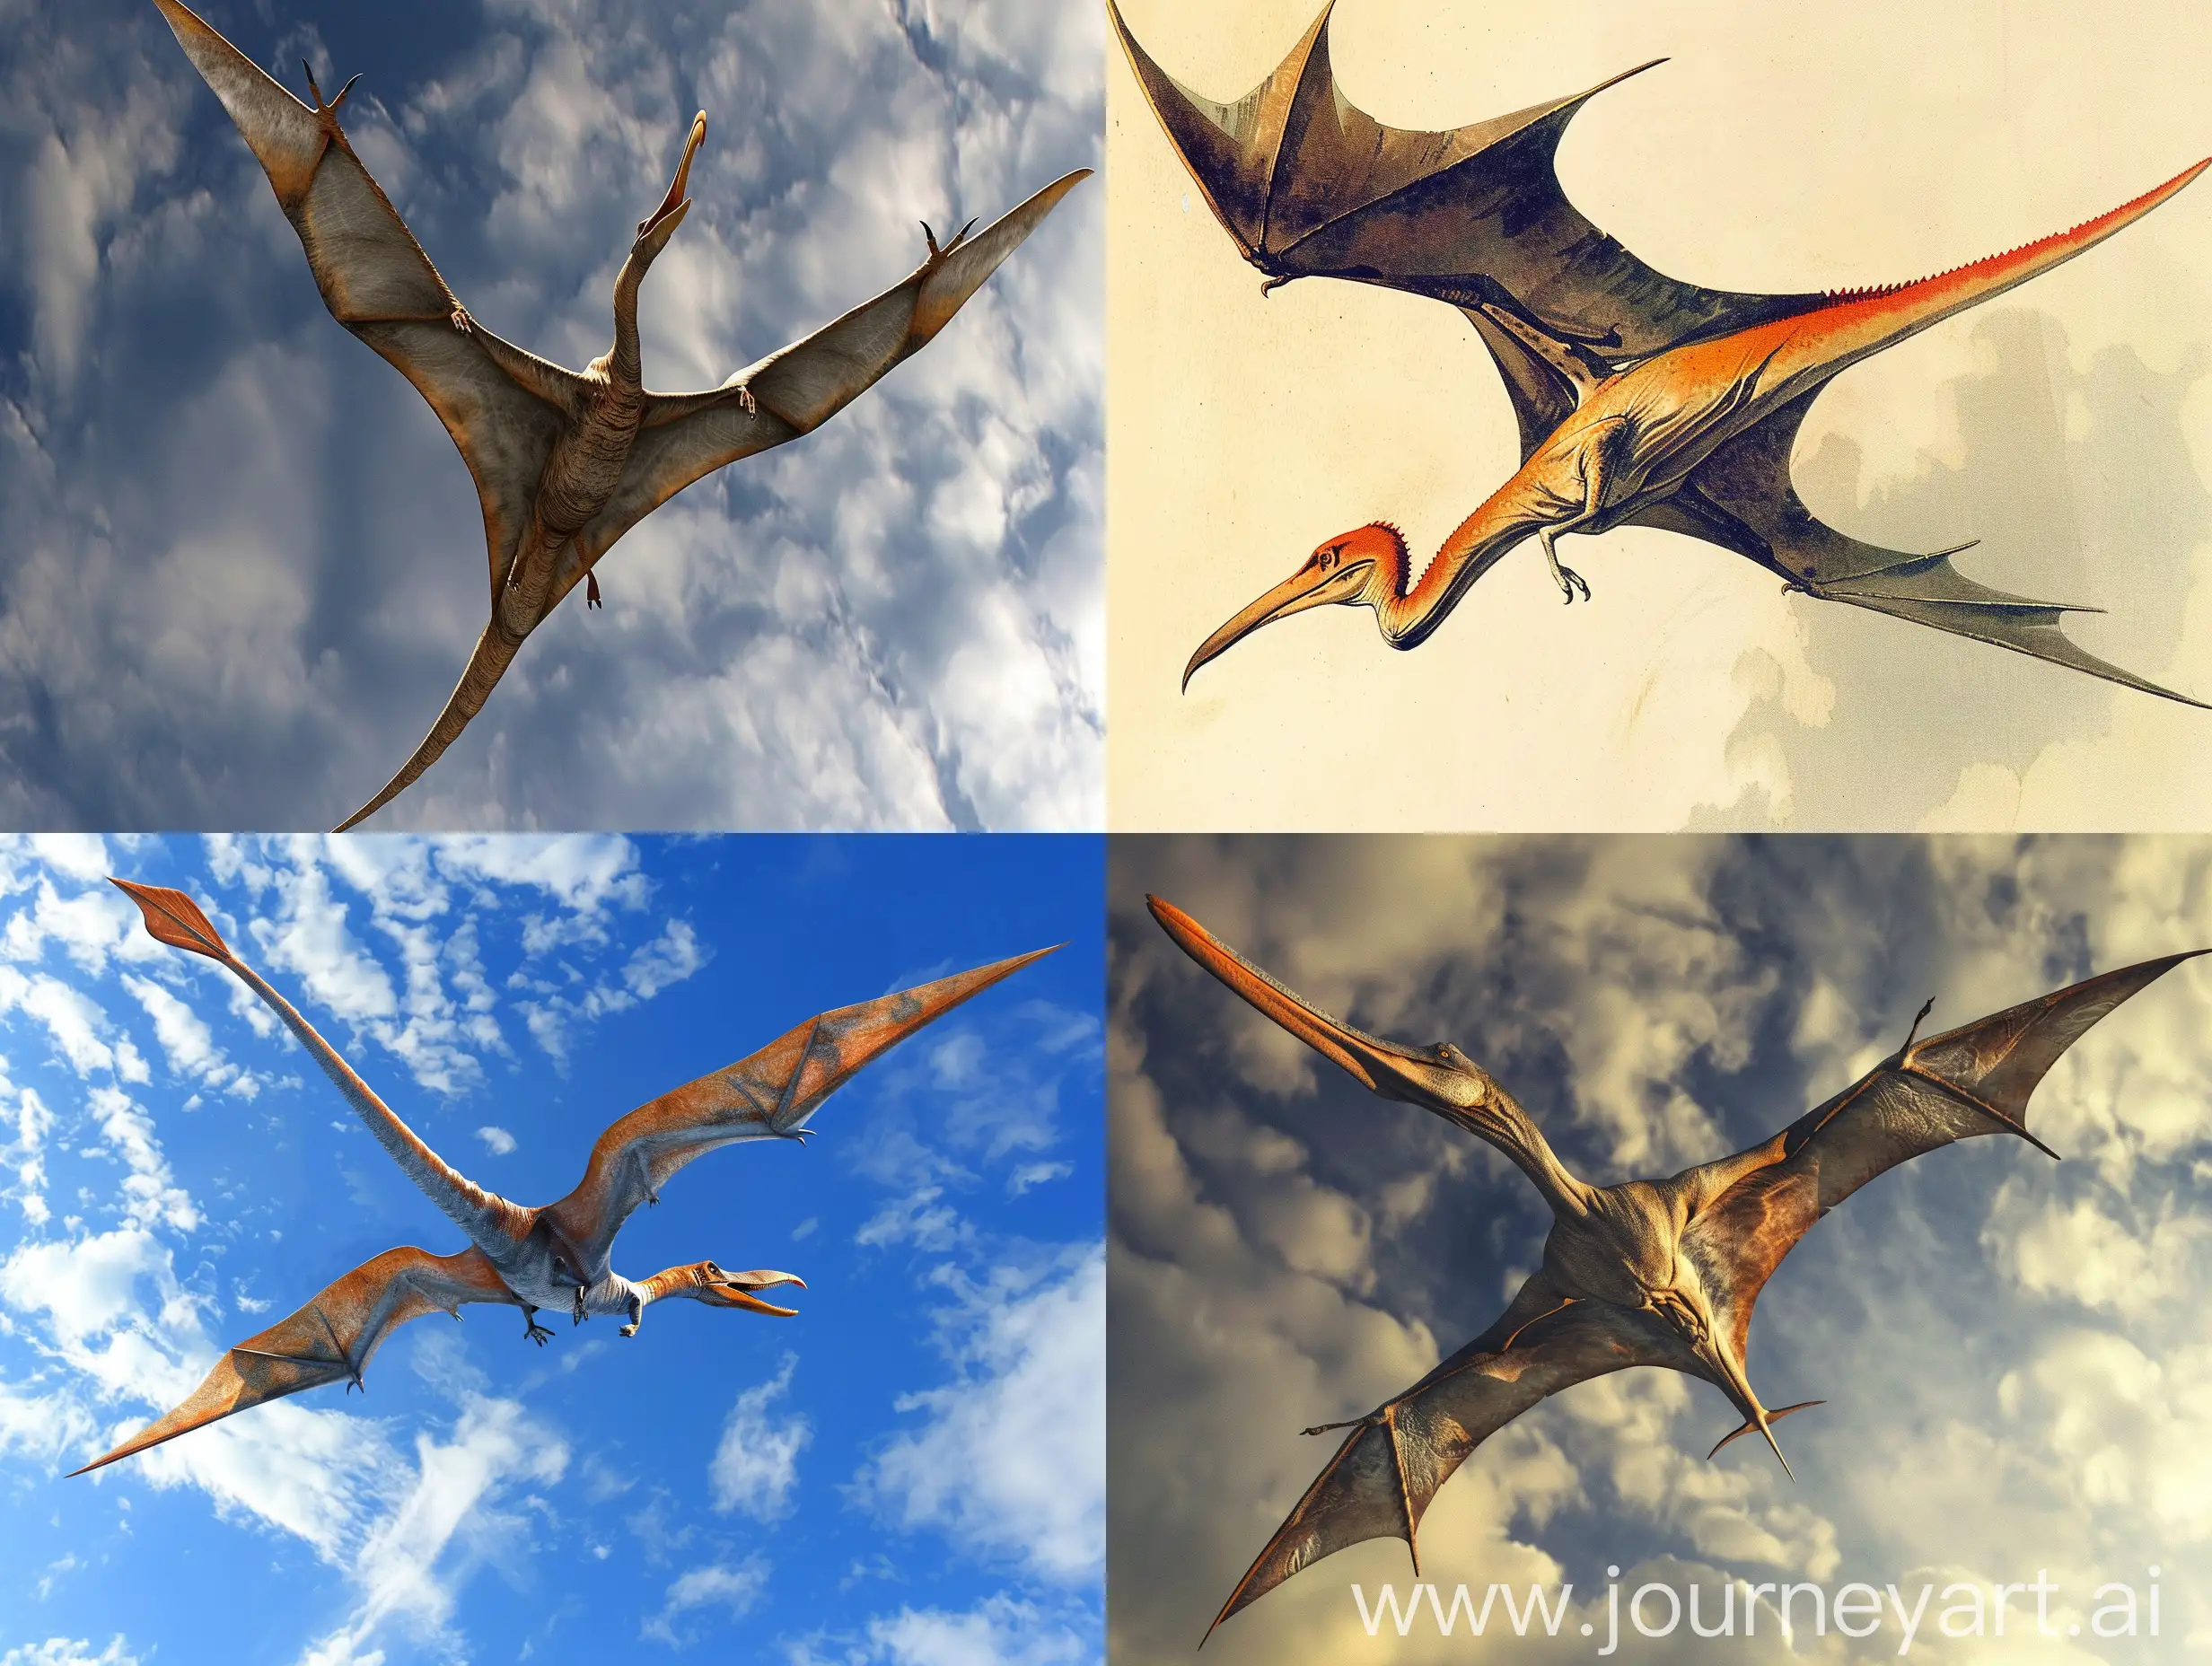 imagine a picture of a flying pterodactyl